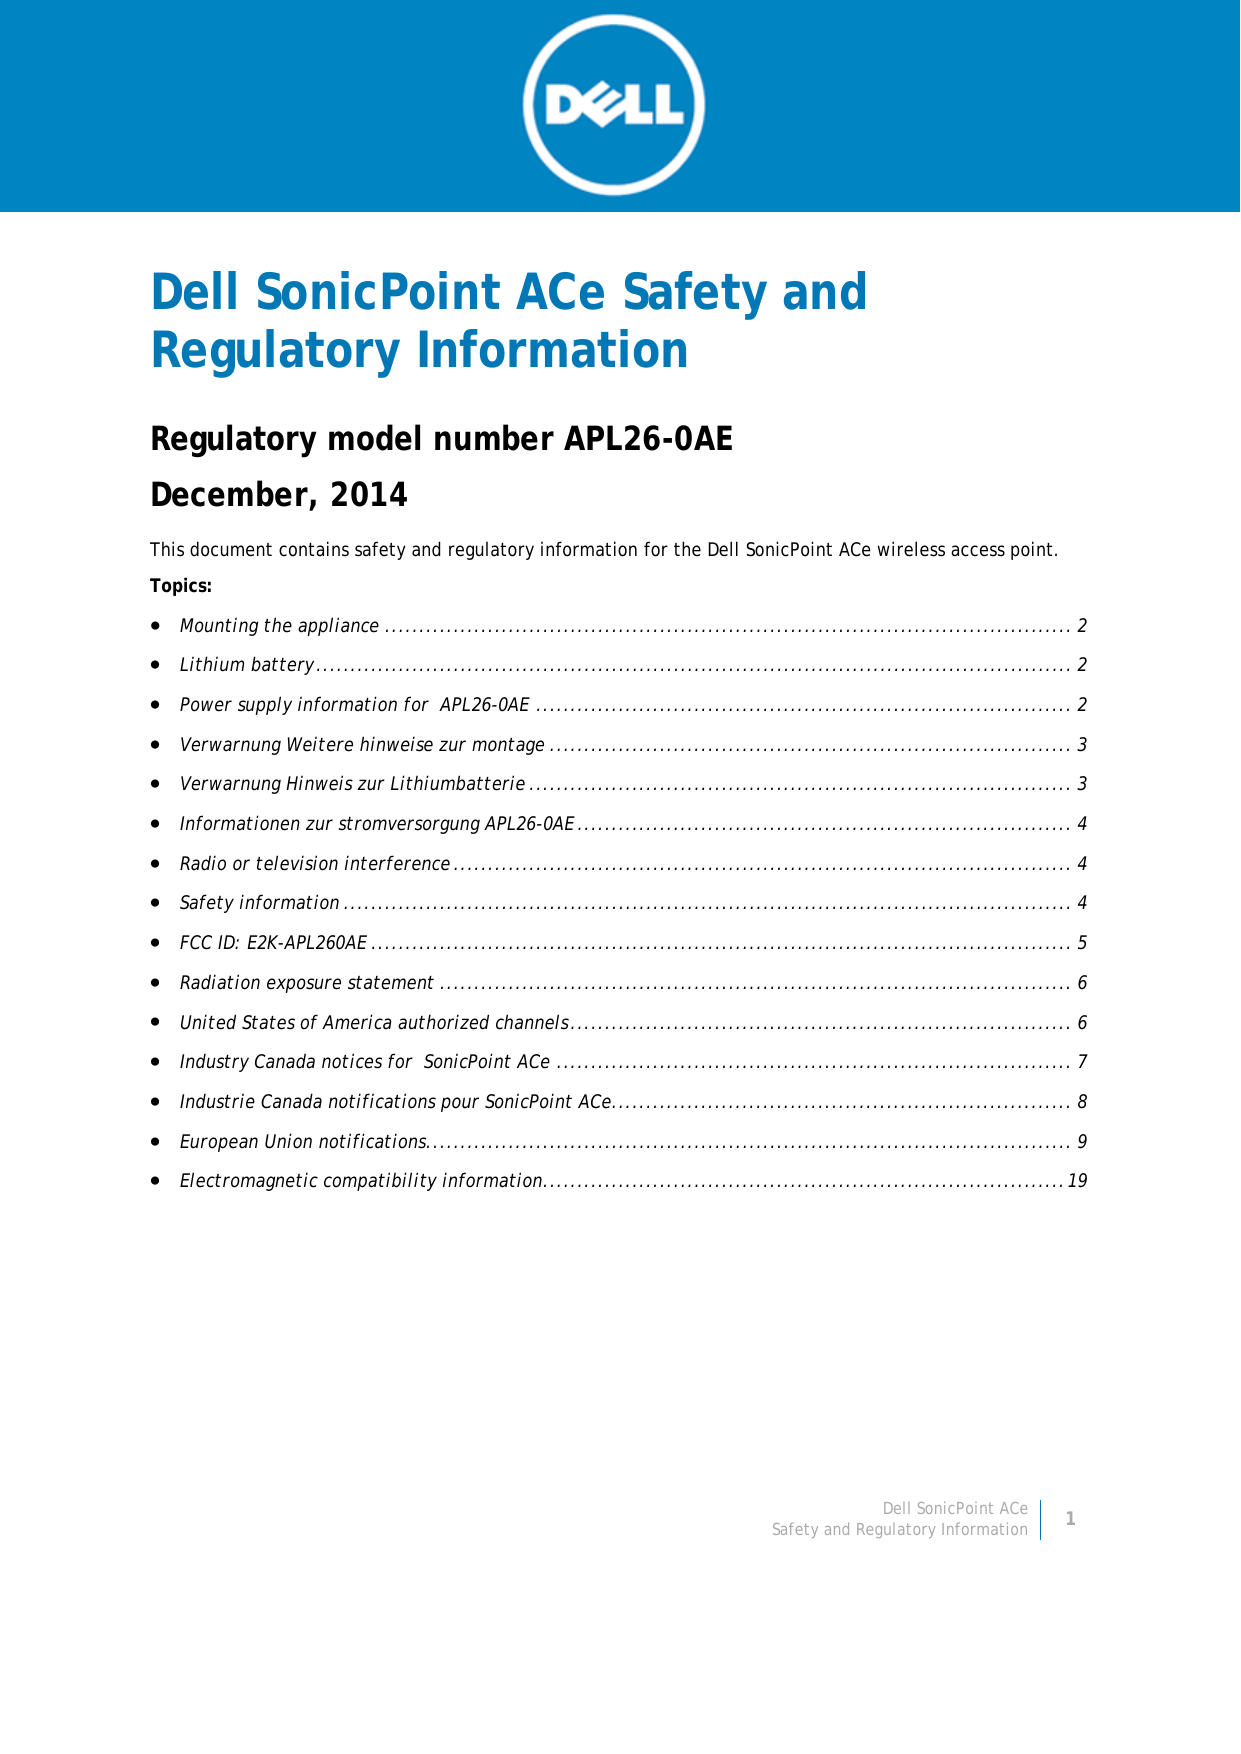 Dell SonicPoint ACe 1 Safety and Regulatory Information     Dell SonicPoint ACe Safety and Regulatory Information Regulatory model number APL26-0AE December, 2014 This document contains safety and regulatory information for the Dell SonicPoint ACe wireless access point.  Topics:  • Mounting the appliance .................................................................................................... 2 • Lithium battery .............................................................................................................. 2 • Power supply information for  APL26-0AE .............................................................................. 2 • Verwarnung Weitere hinweise zur montage ............................................................................ 3 • Verwarnung Hinweis zur Lithiumbatterie ............................................................................... 3 • Informationen zur stromversorgung APL26-0AE ........................................................................ 4 • Radio or television interference .......................................................................................... 4 • Safety information .......................................................................................................... 4 • FCC ID: E2K-APL260AE ...................................................................................................... 5 • Radiation exposure statement ............................................................................................ 6 • United States of America authorized channels ......................................................................... 6 • Industry Canada notices for  SonicPoint ACe ........................................................................... 7 • Industrie Canada notifications pour SonicPoint ACe ................................................................... 8 • European Union notifications .............................................................................................. 9 • Electromagnetic compatibility information............................................................................ 19     